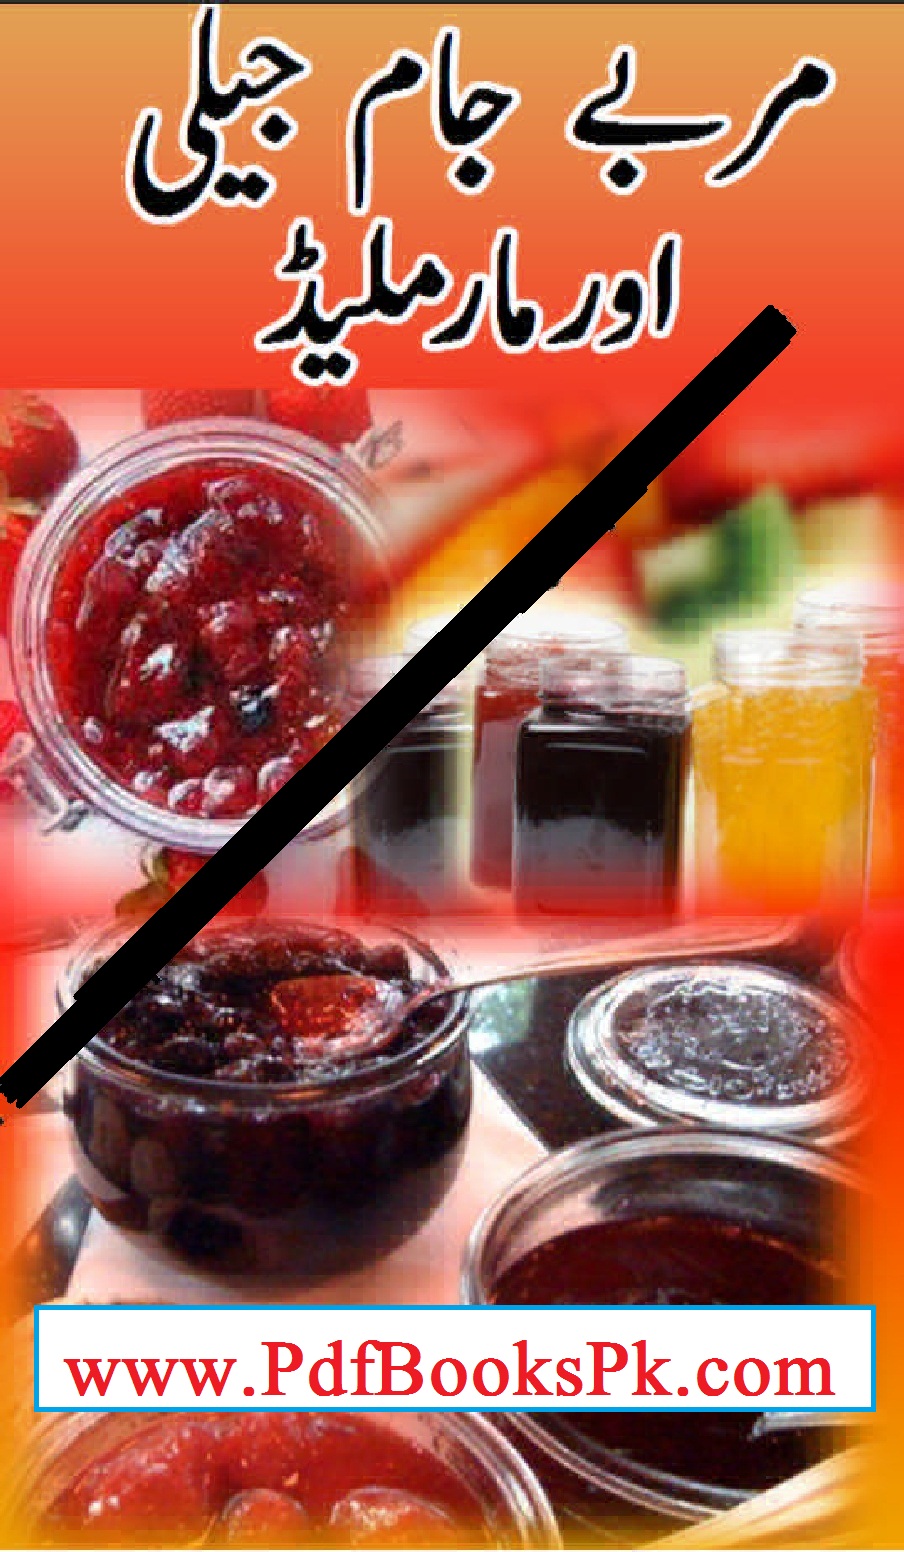 Jams, Jelly and Marmalade Recipes Book in Urdu by pdfbookspk